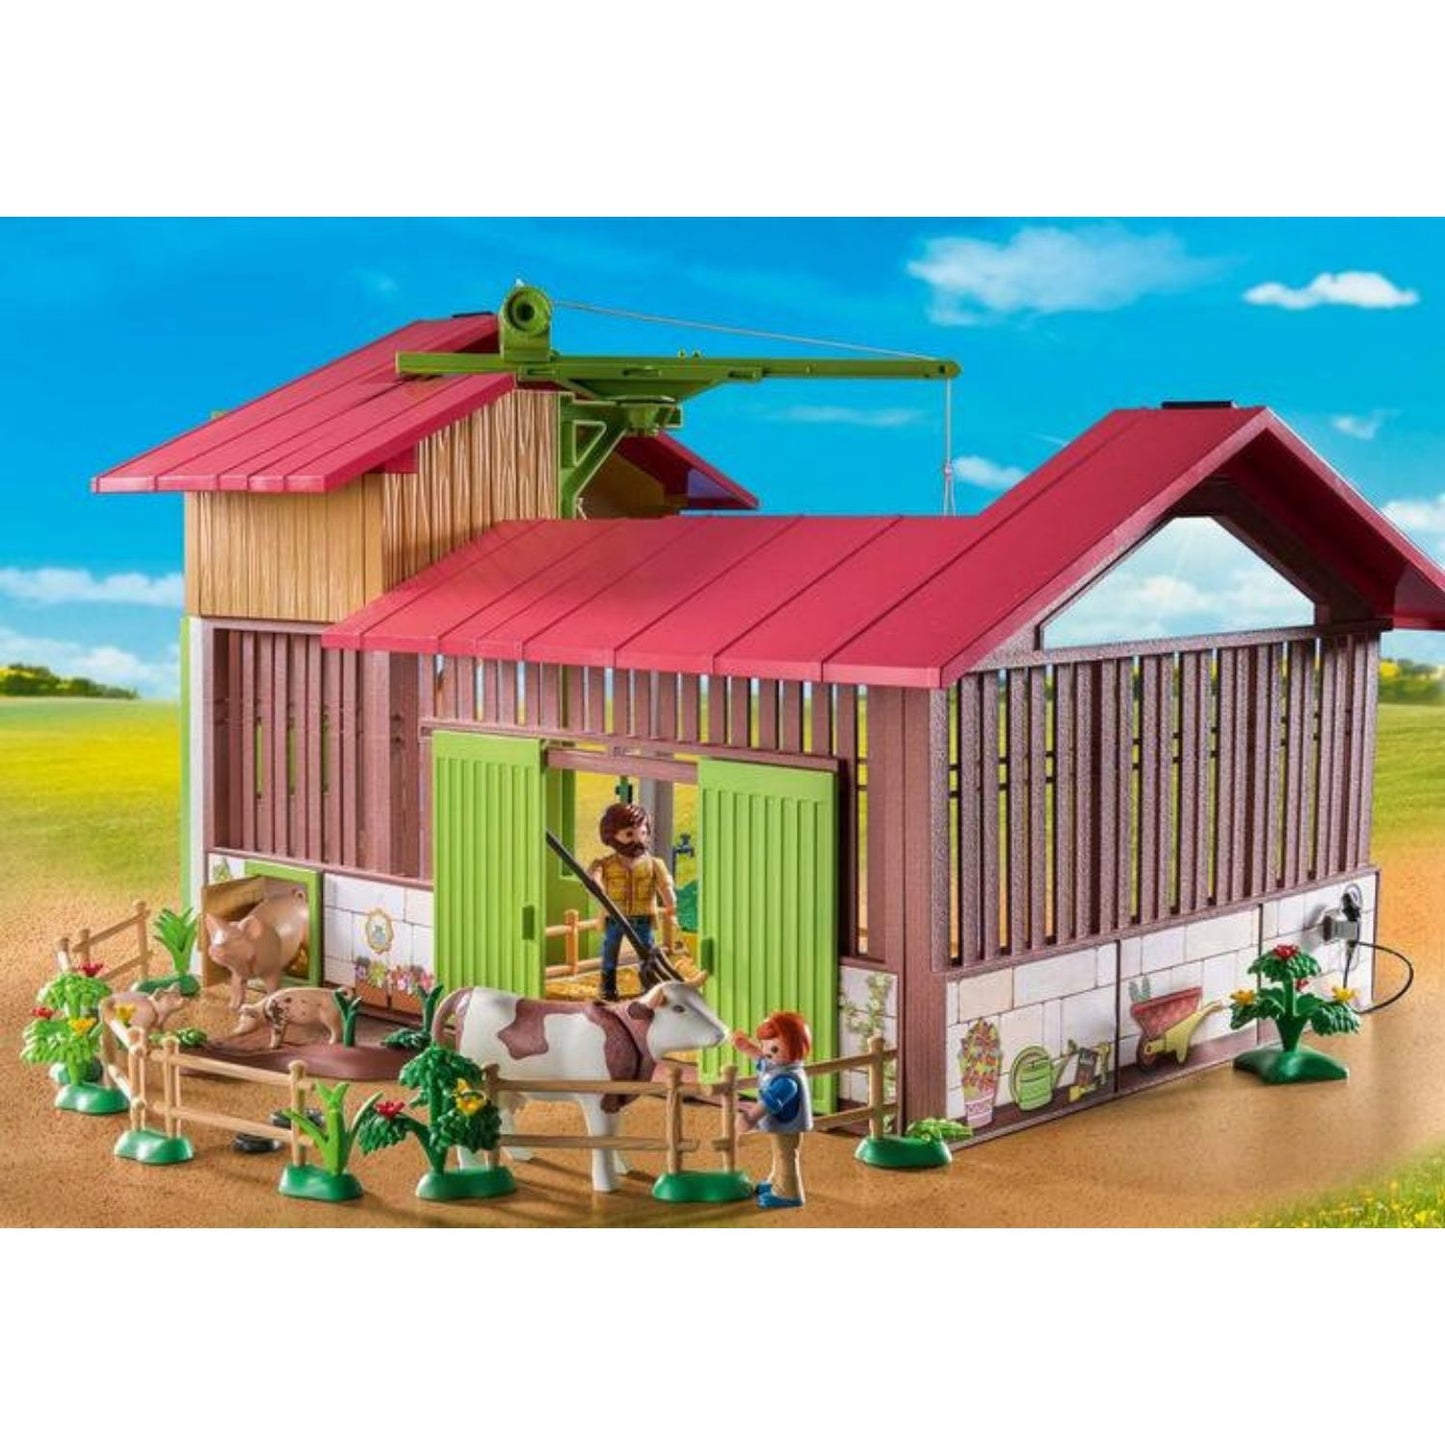 Large Farm | Country | Eco-Plastic | Open-Ended Play For Kids